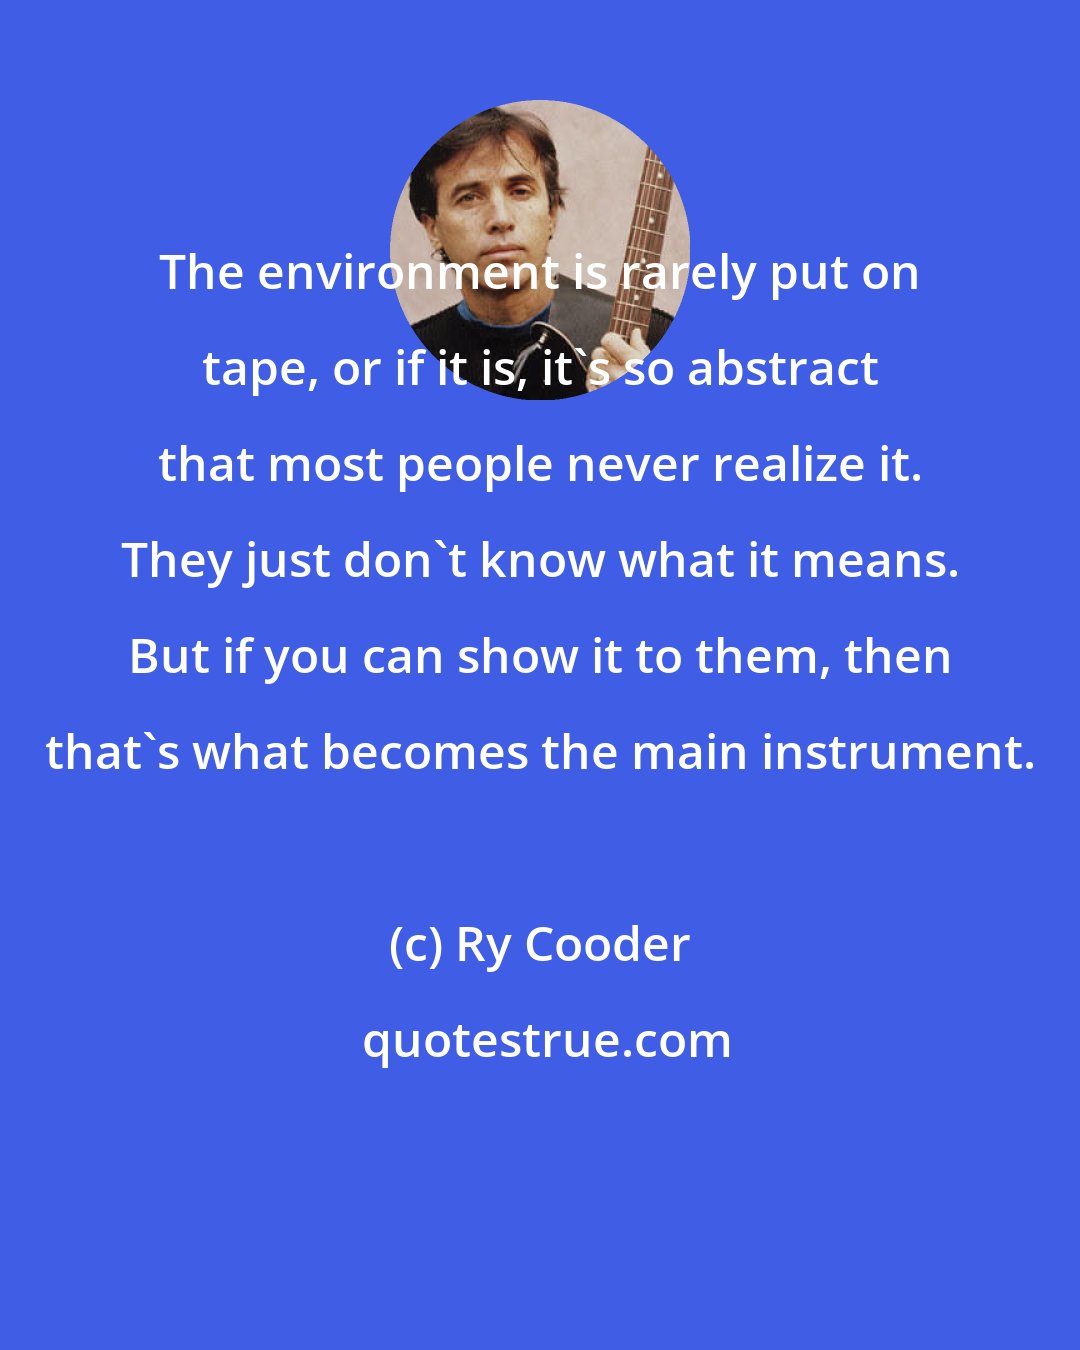 Ry Cooder: The environment is rarely put on tape, or if it is, it's so abstract that most people never realize it. They just don't know what it means. But if you can show it to them, then that's what becomes the main instrument.